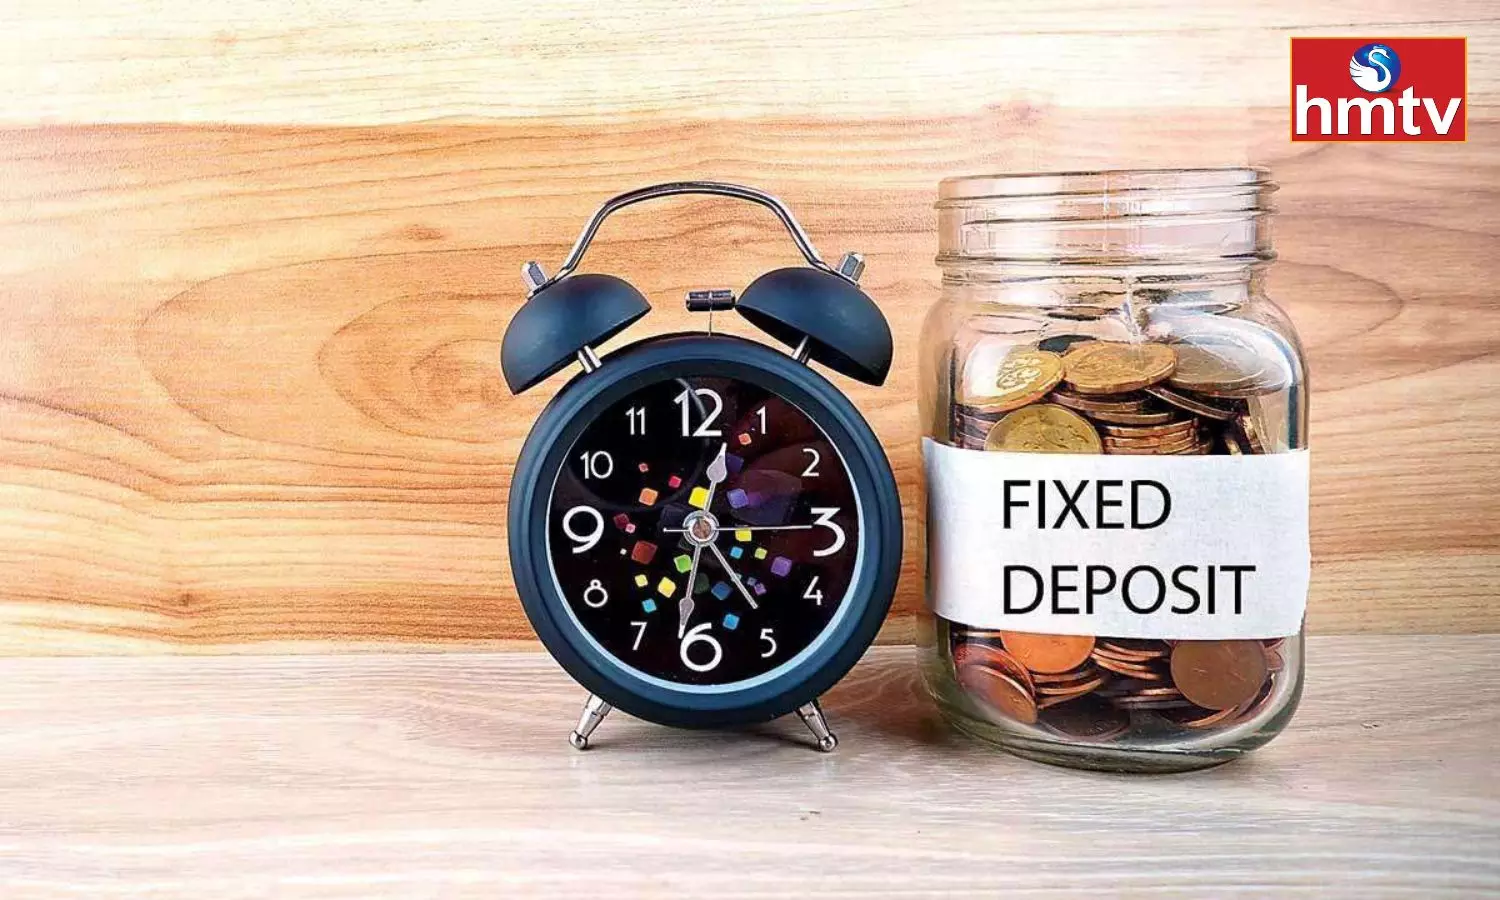 Can You Break the Old Fixed Deposit and Make a New one Know What is Right